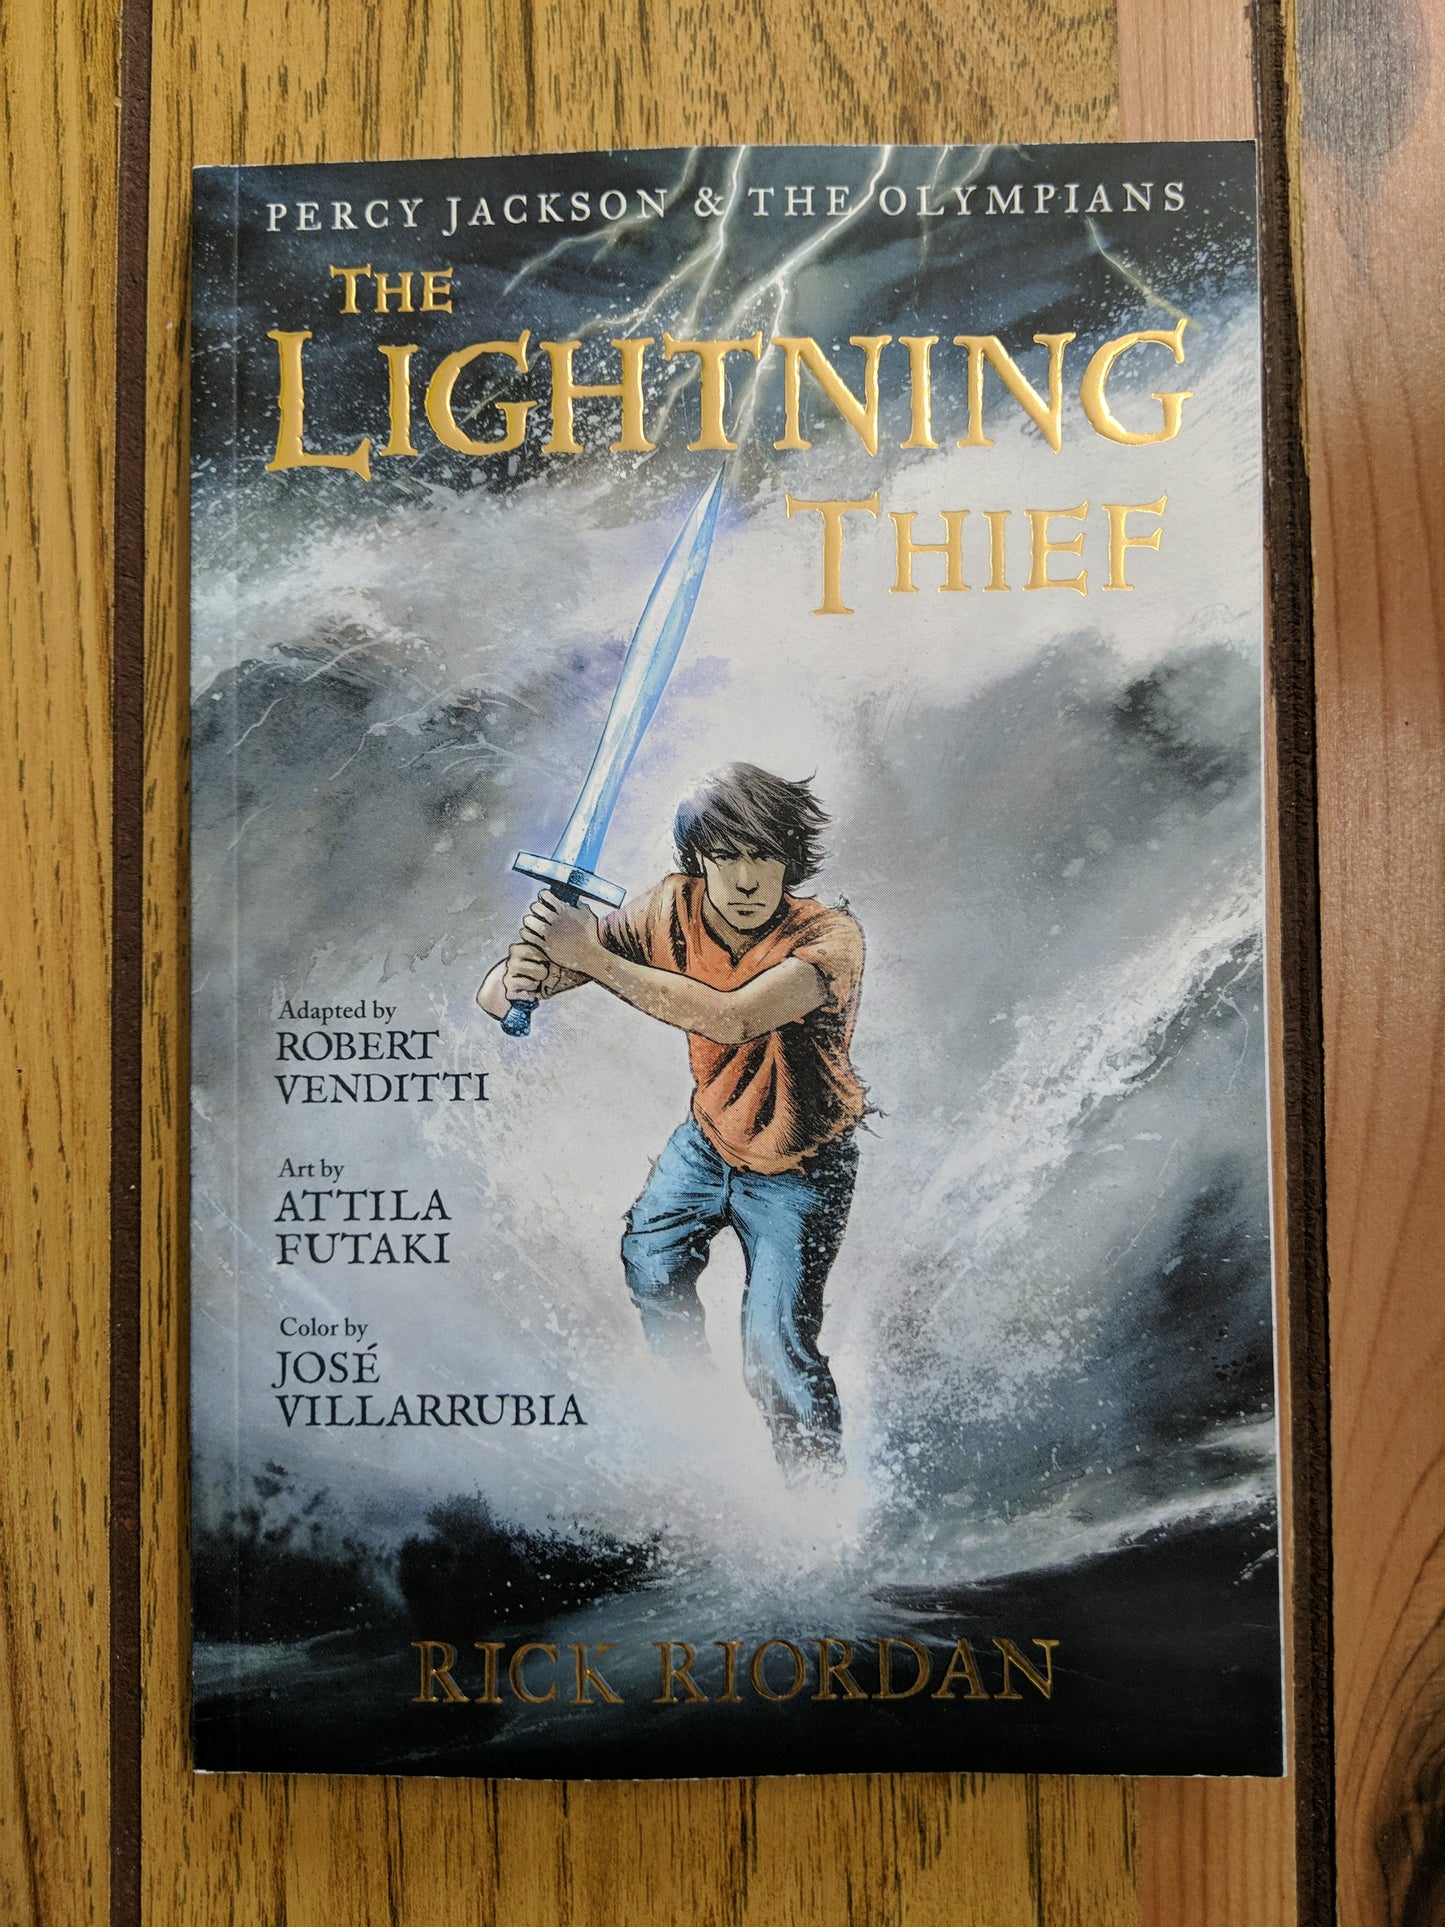 The Lightning Thief: The Graphic Novel (Percy Jackson & the Olympians #1)